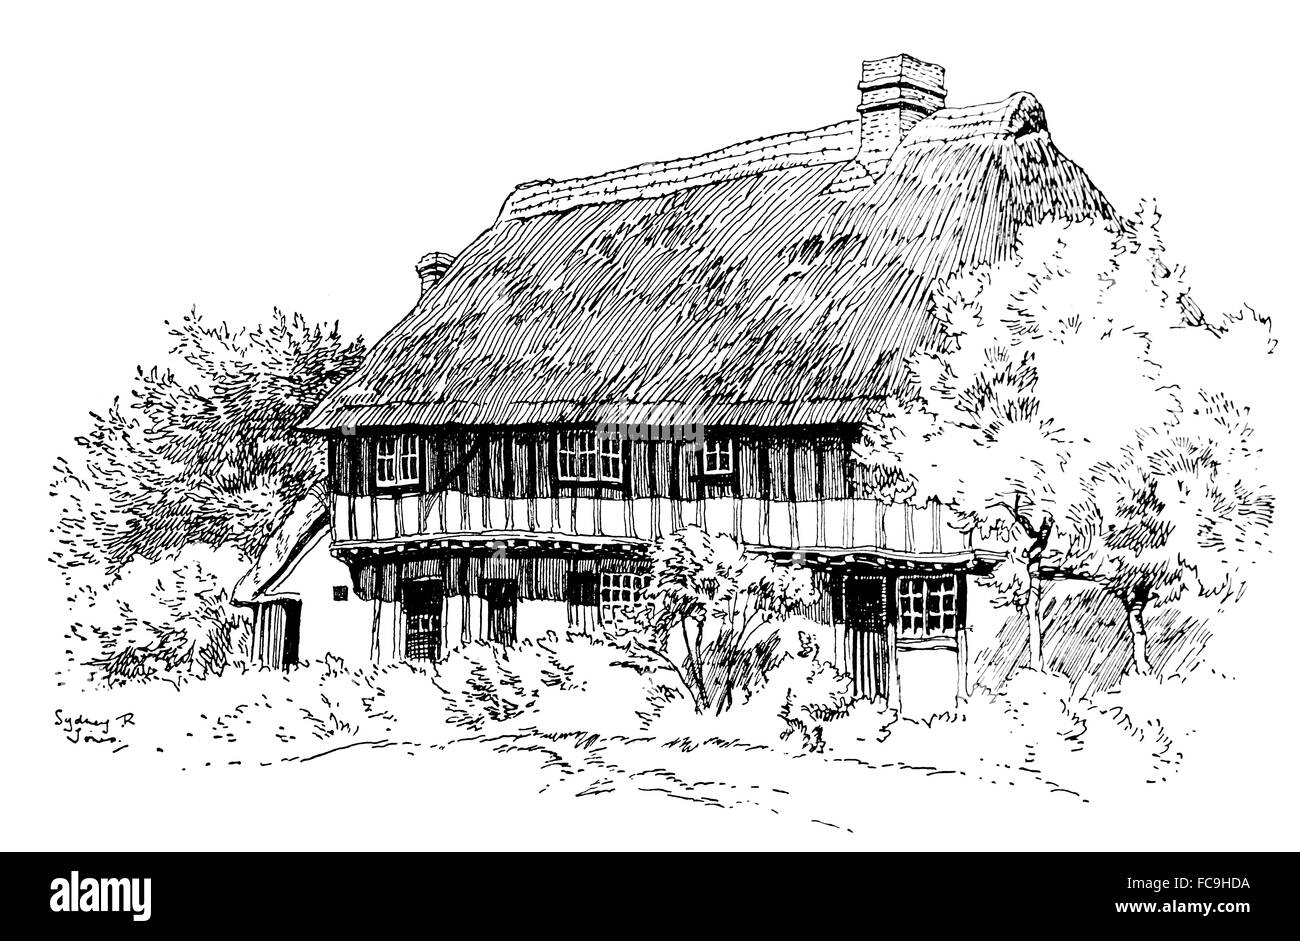 UK, England, Essex, Little Chesterford, timber framed thatched house, 1911, line illustration by, Sydney R Jones, from The Studi Stock Photo